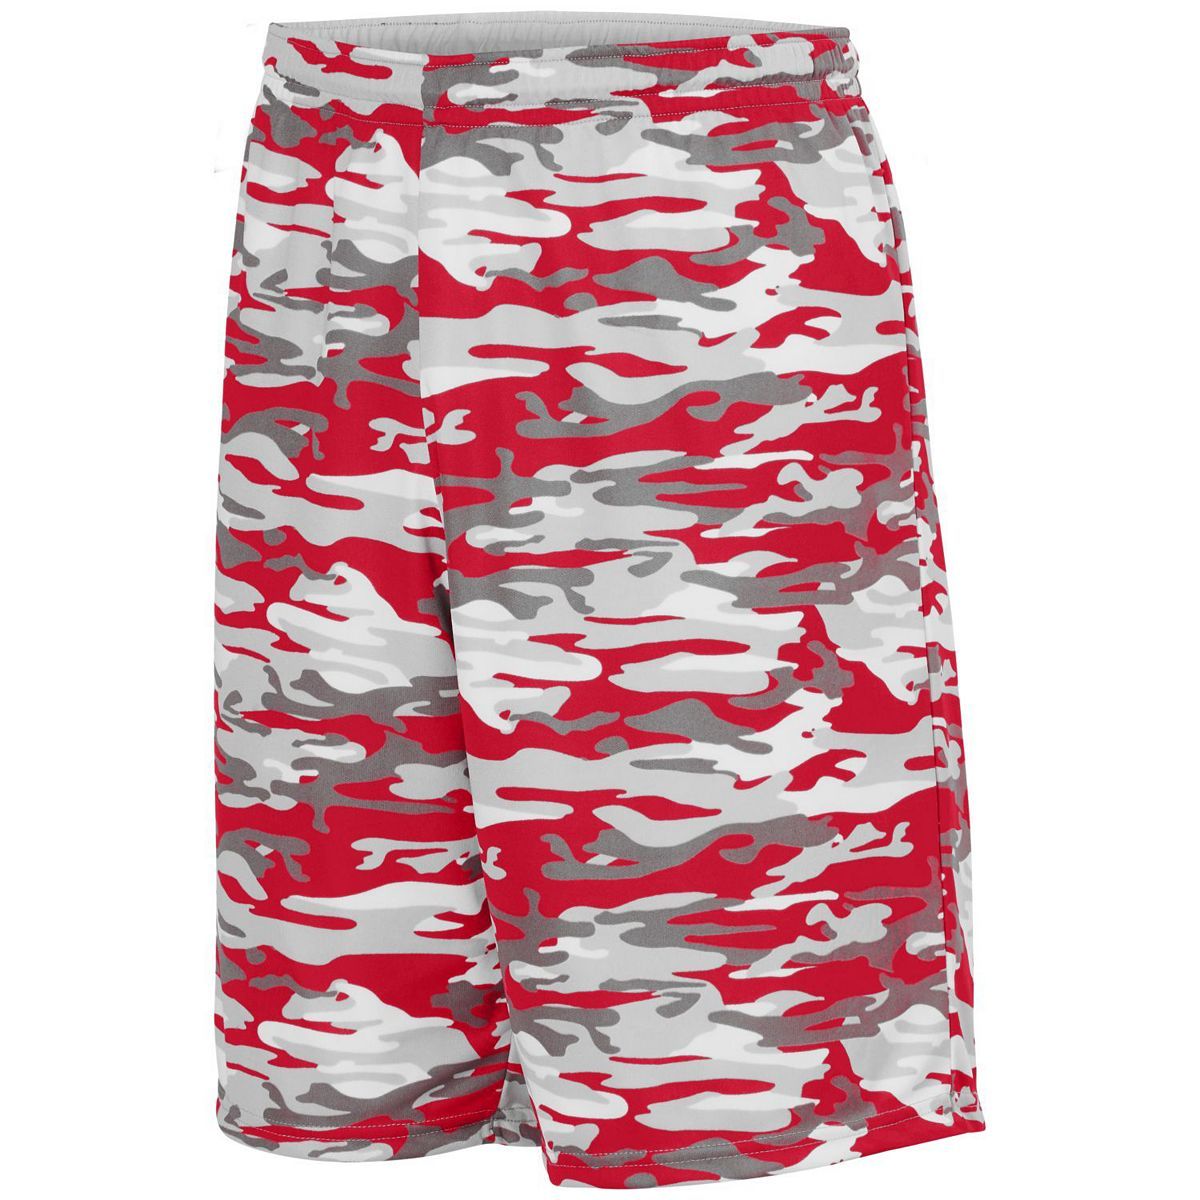 Augusta Sportswear Reversible Wicking Shorts in Red Mod/White  -Part of the Adult, Adult-Shorts, Augusta-Products, Basketball, All-Sports, All-Sports-1 product lines at KanaleyCreations.com